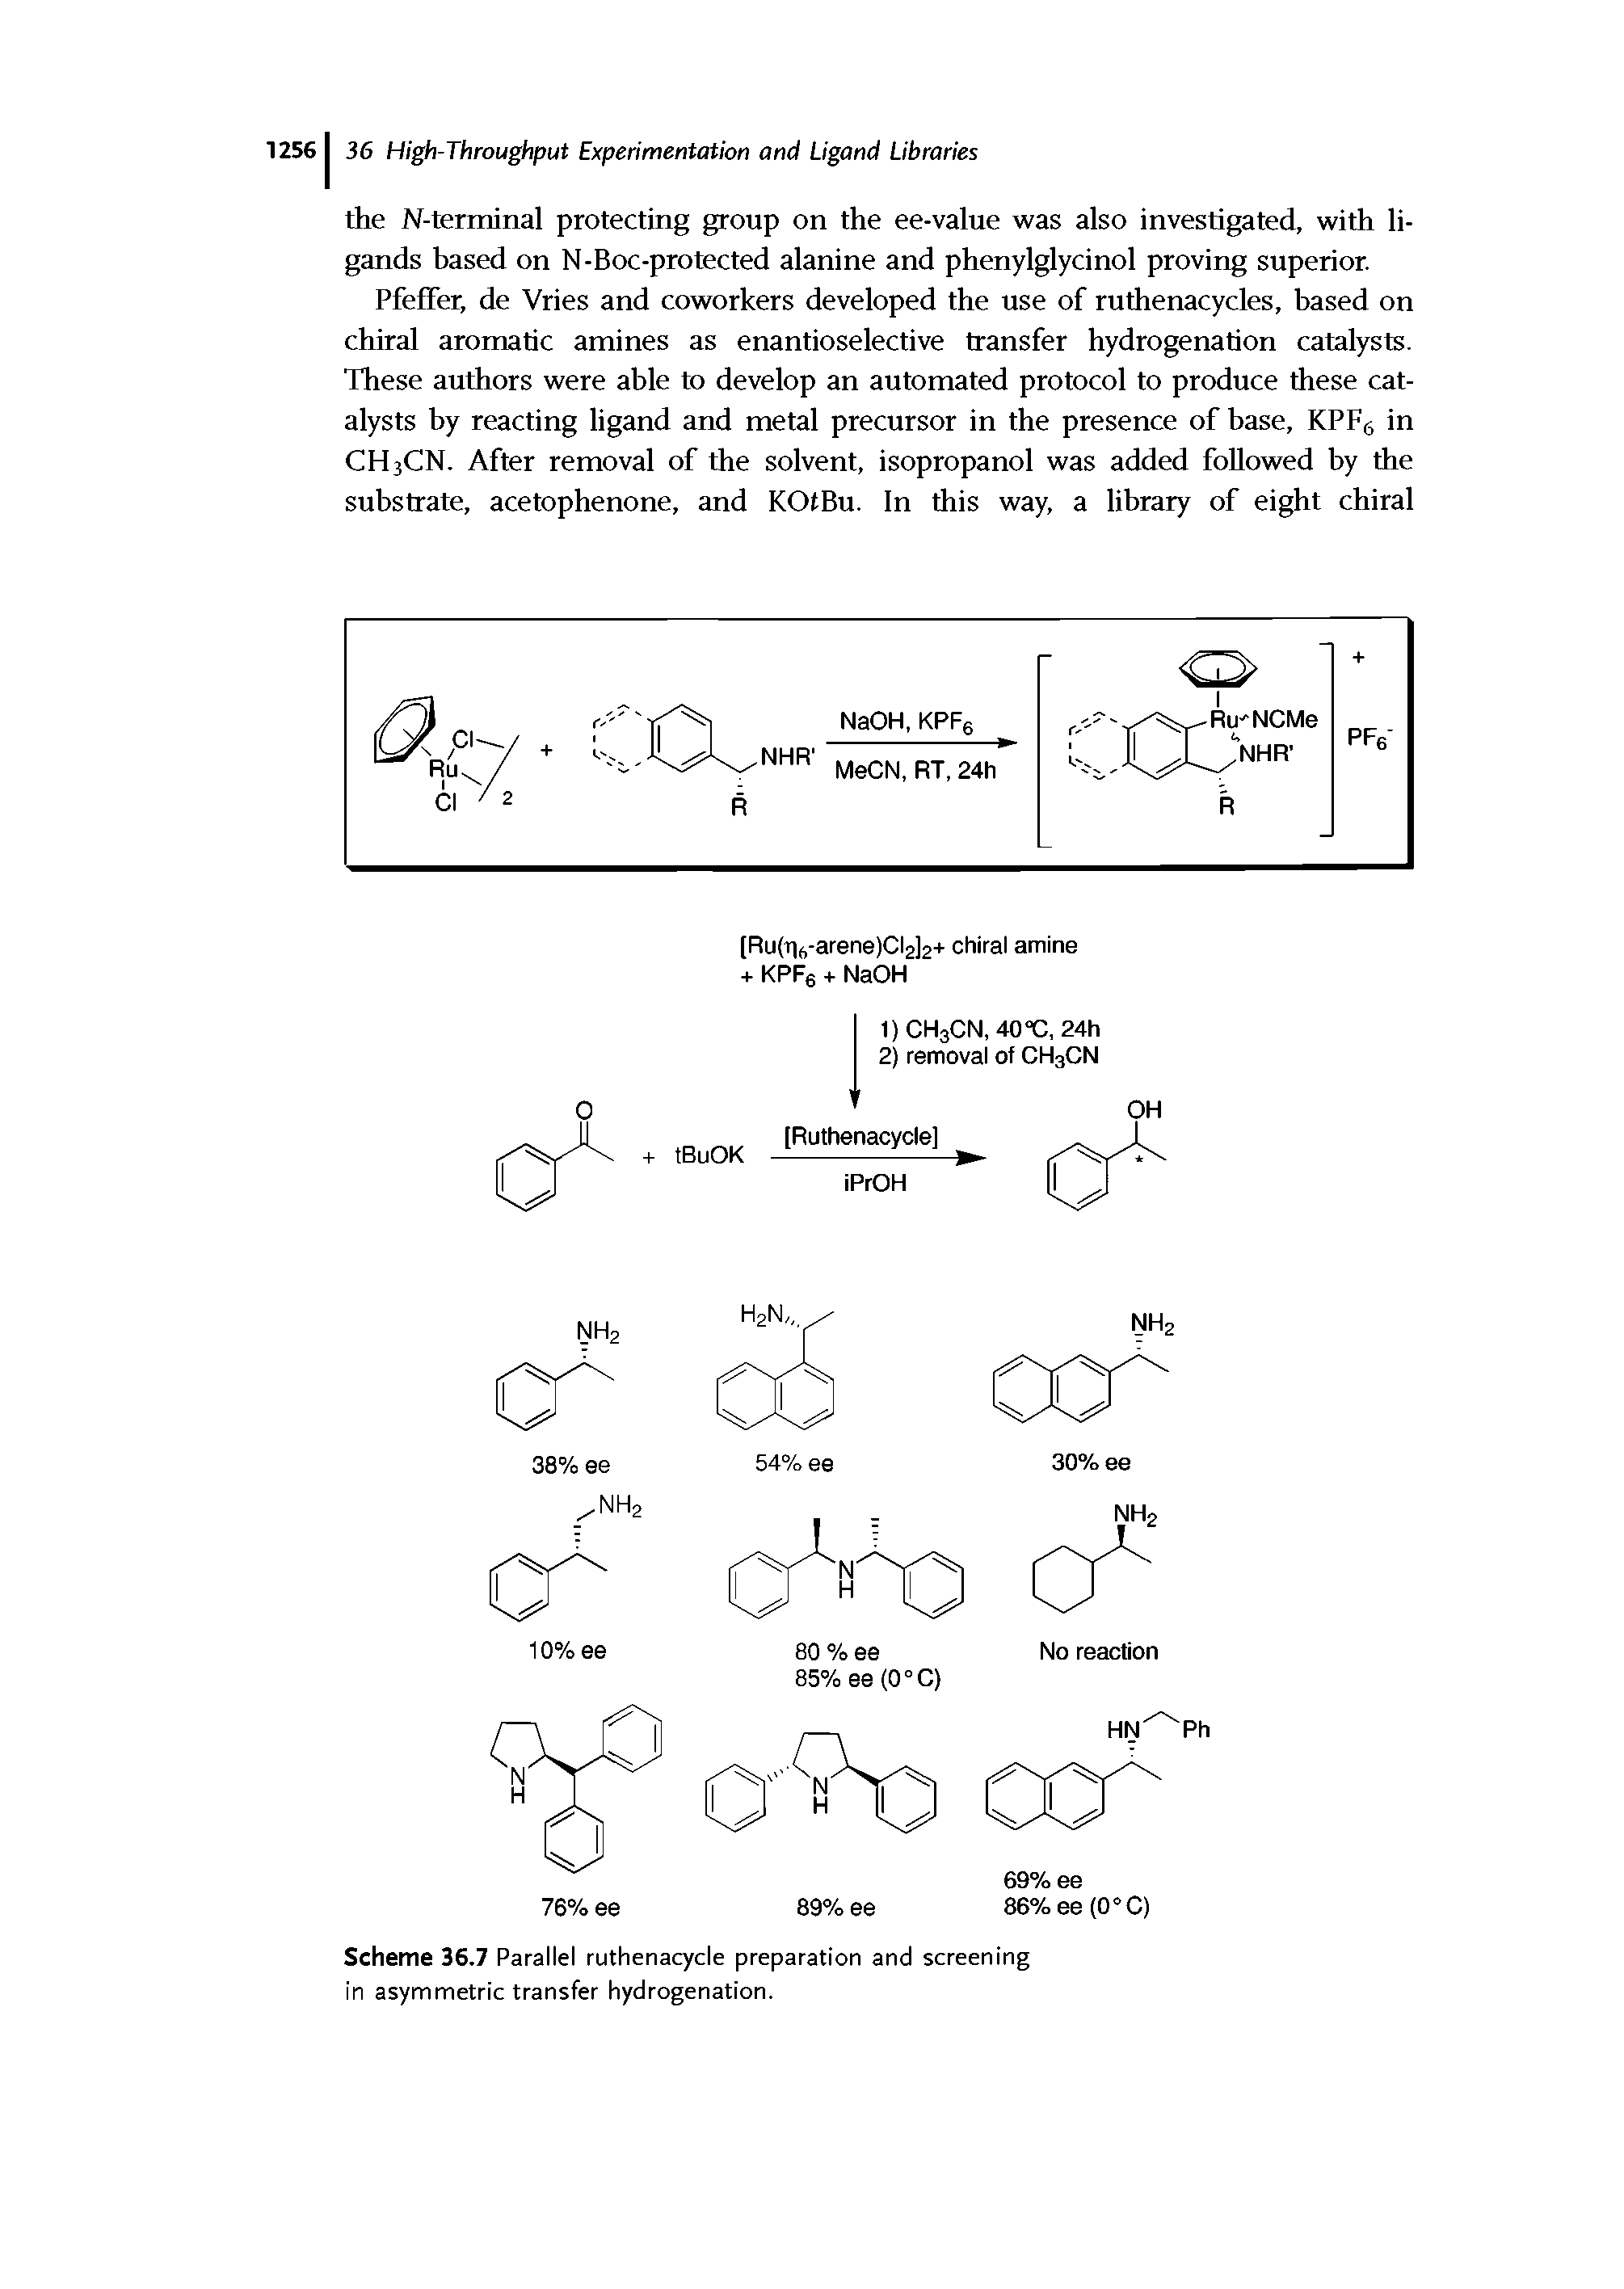 Scheme 36.7 Parallel ruthenacycle preparation and screening in asymmetric transfer hydrogenation.